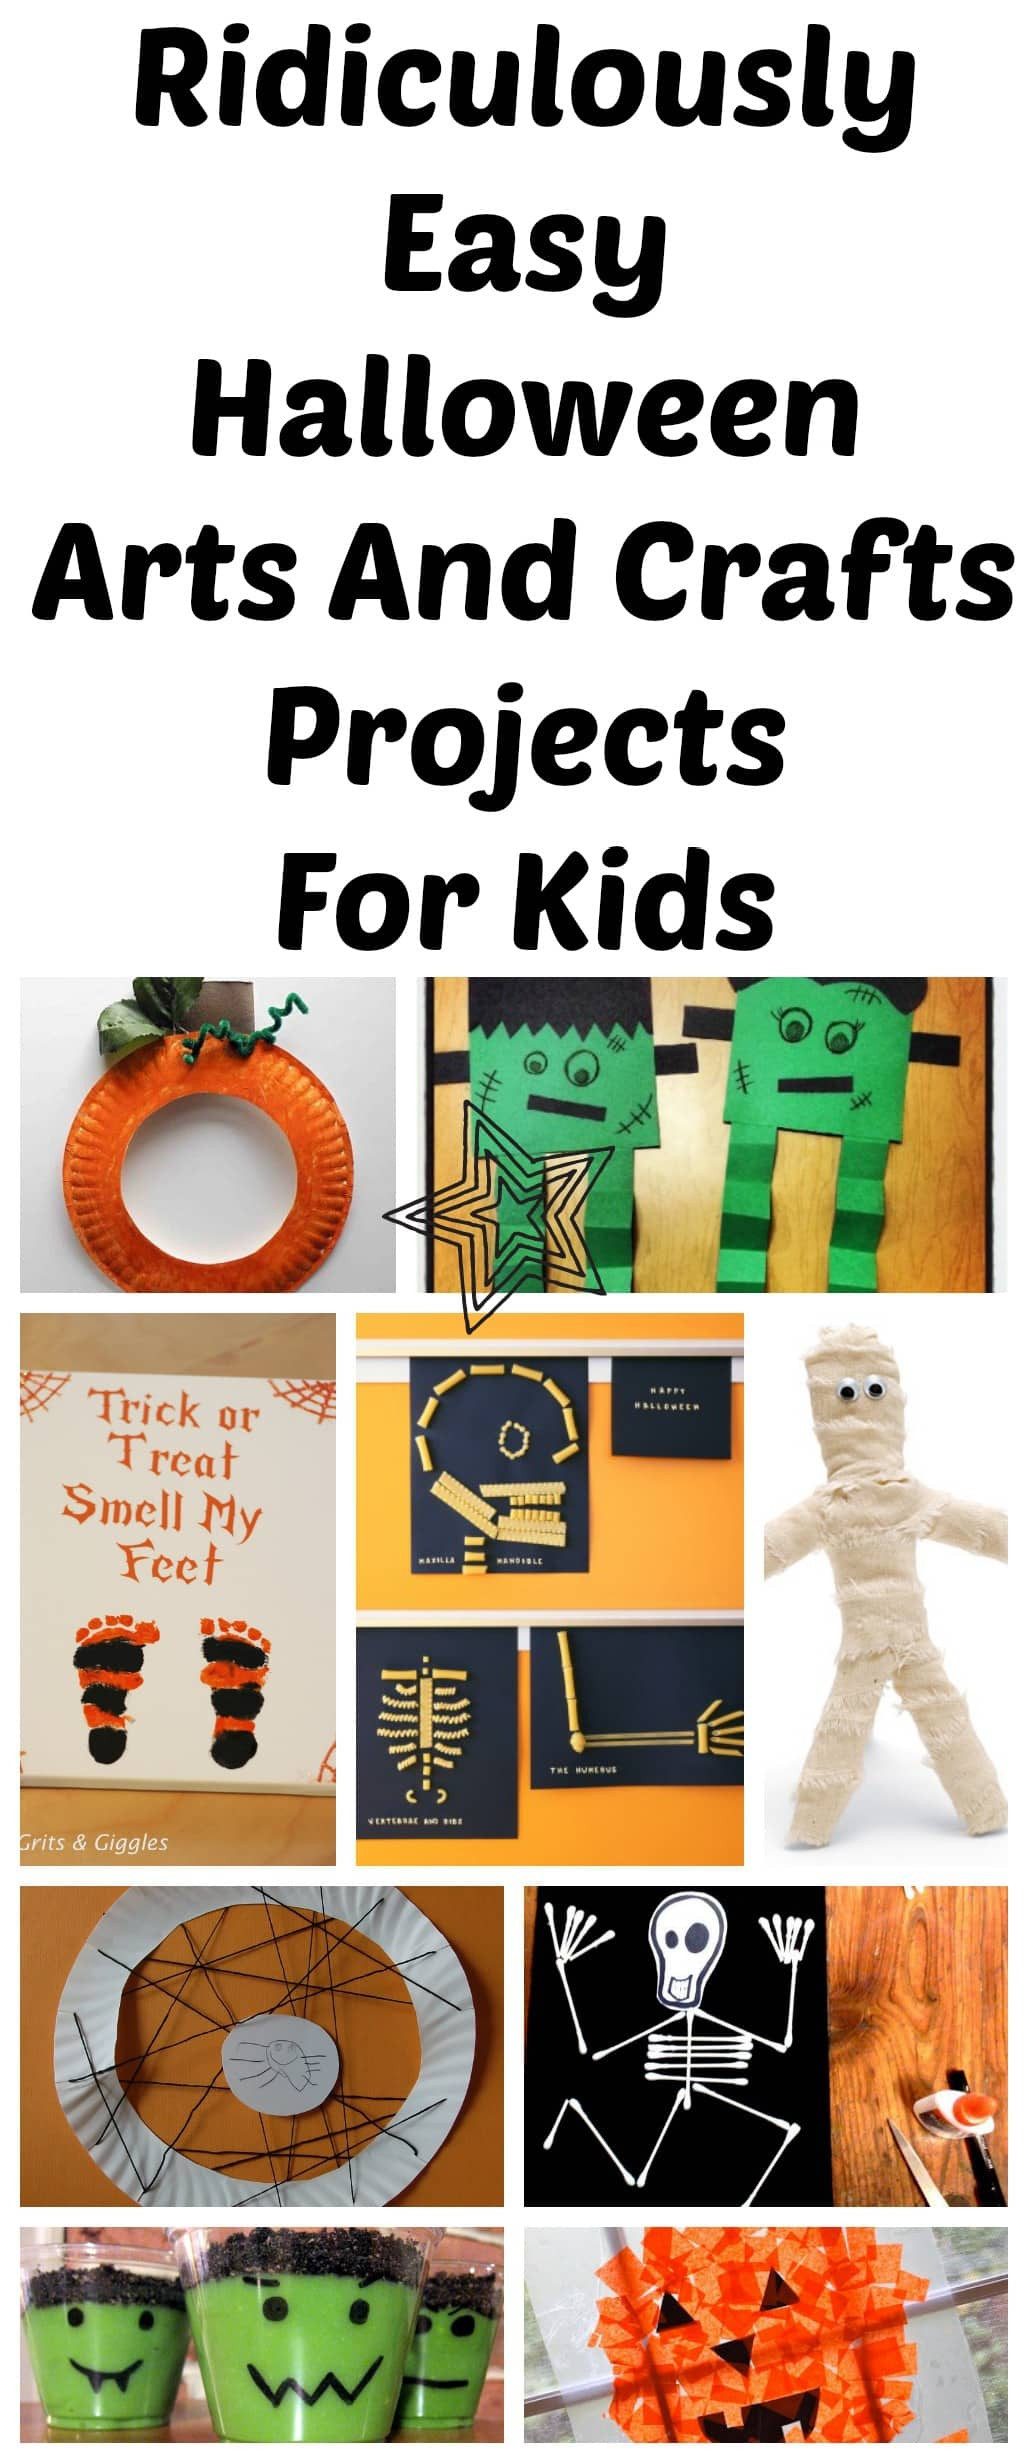 Toddler Arts And Craft Projects
 10 Ridiculously Easy Halloween Arts And Crafts Projects To